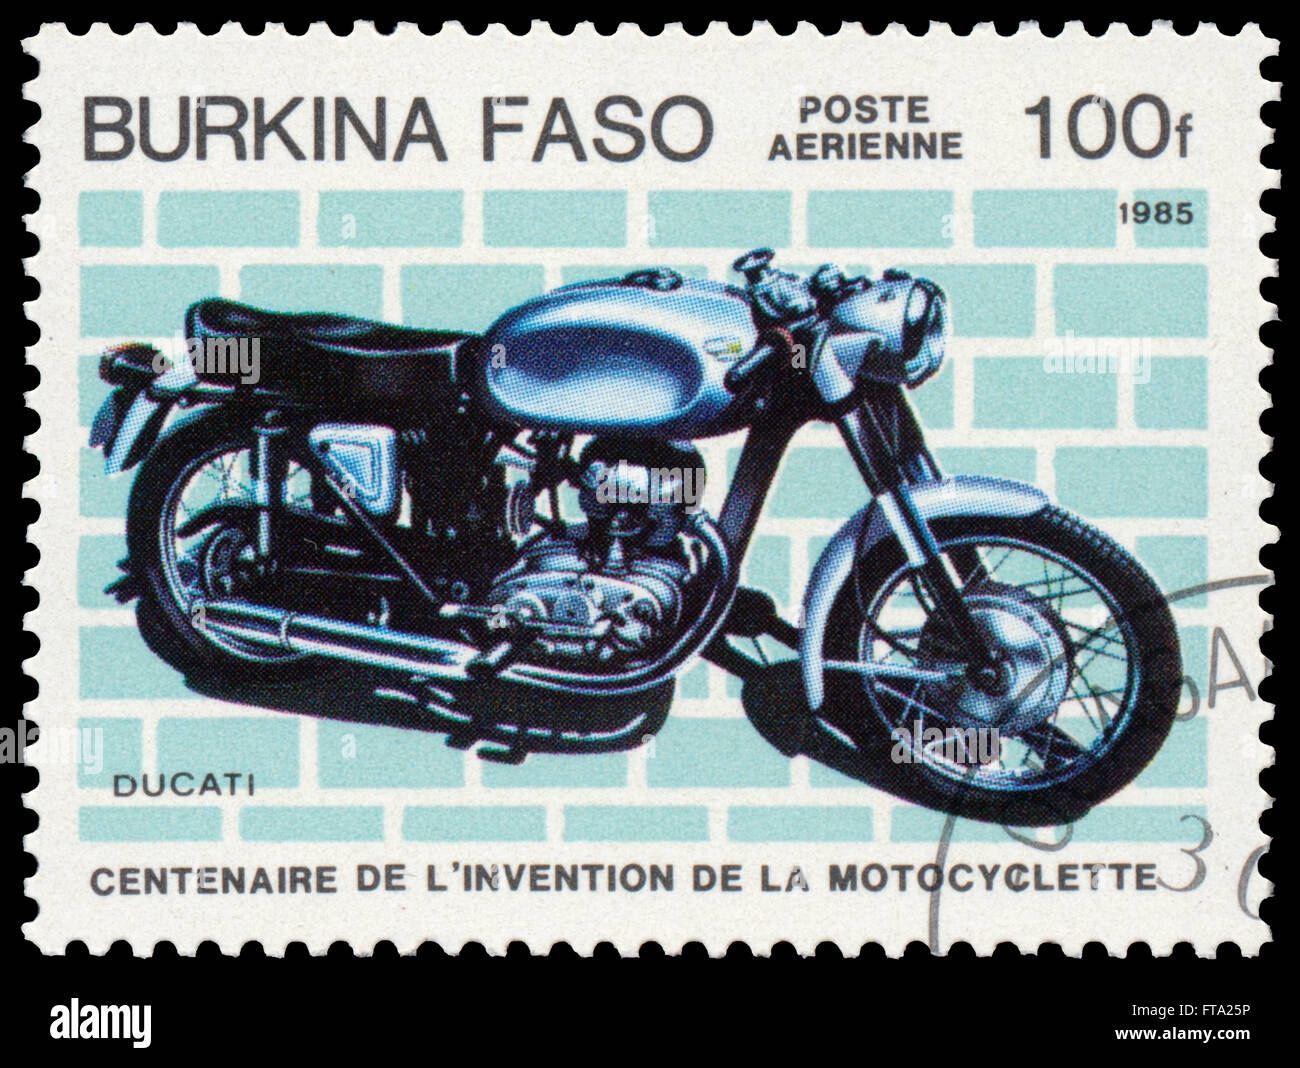 BUDAPEST, HUNGARY - 18 march 2016:  a stamp printed in Burkina Faso shows image of a vintage motorcycle, Ducati, circa 1985 Stock Photo